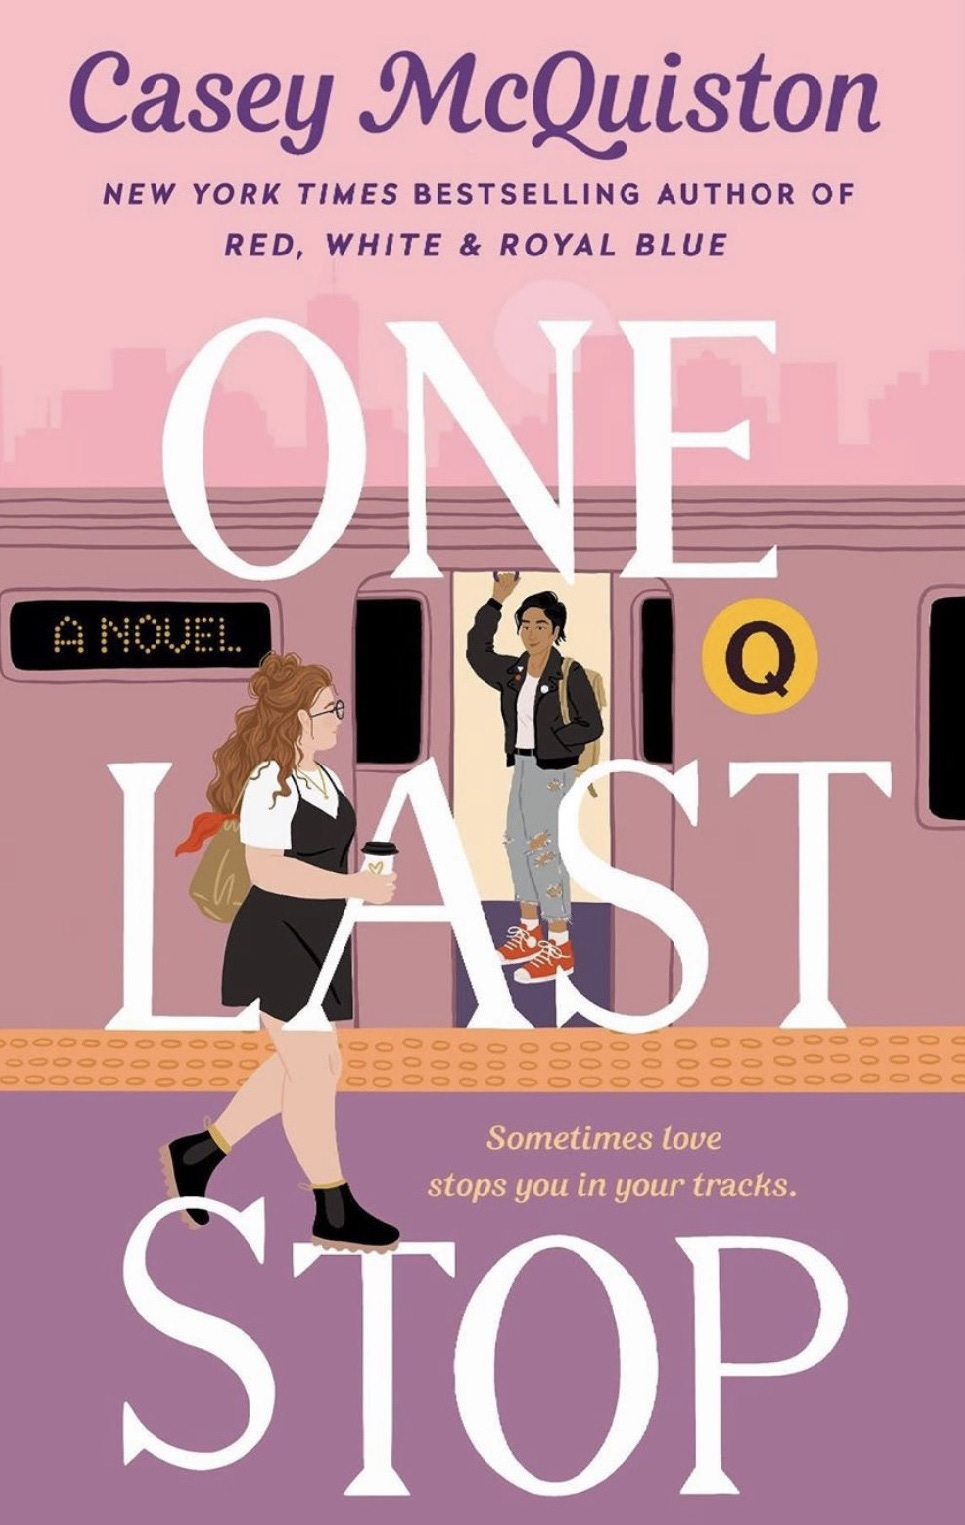 Can’t Wait Wednesday – ONE LAST STOP by Casey Mcquiston – The Bookish Libra